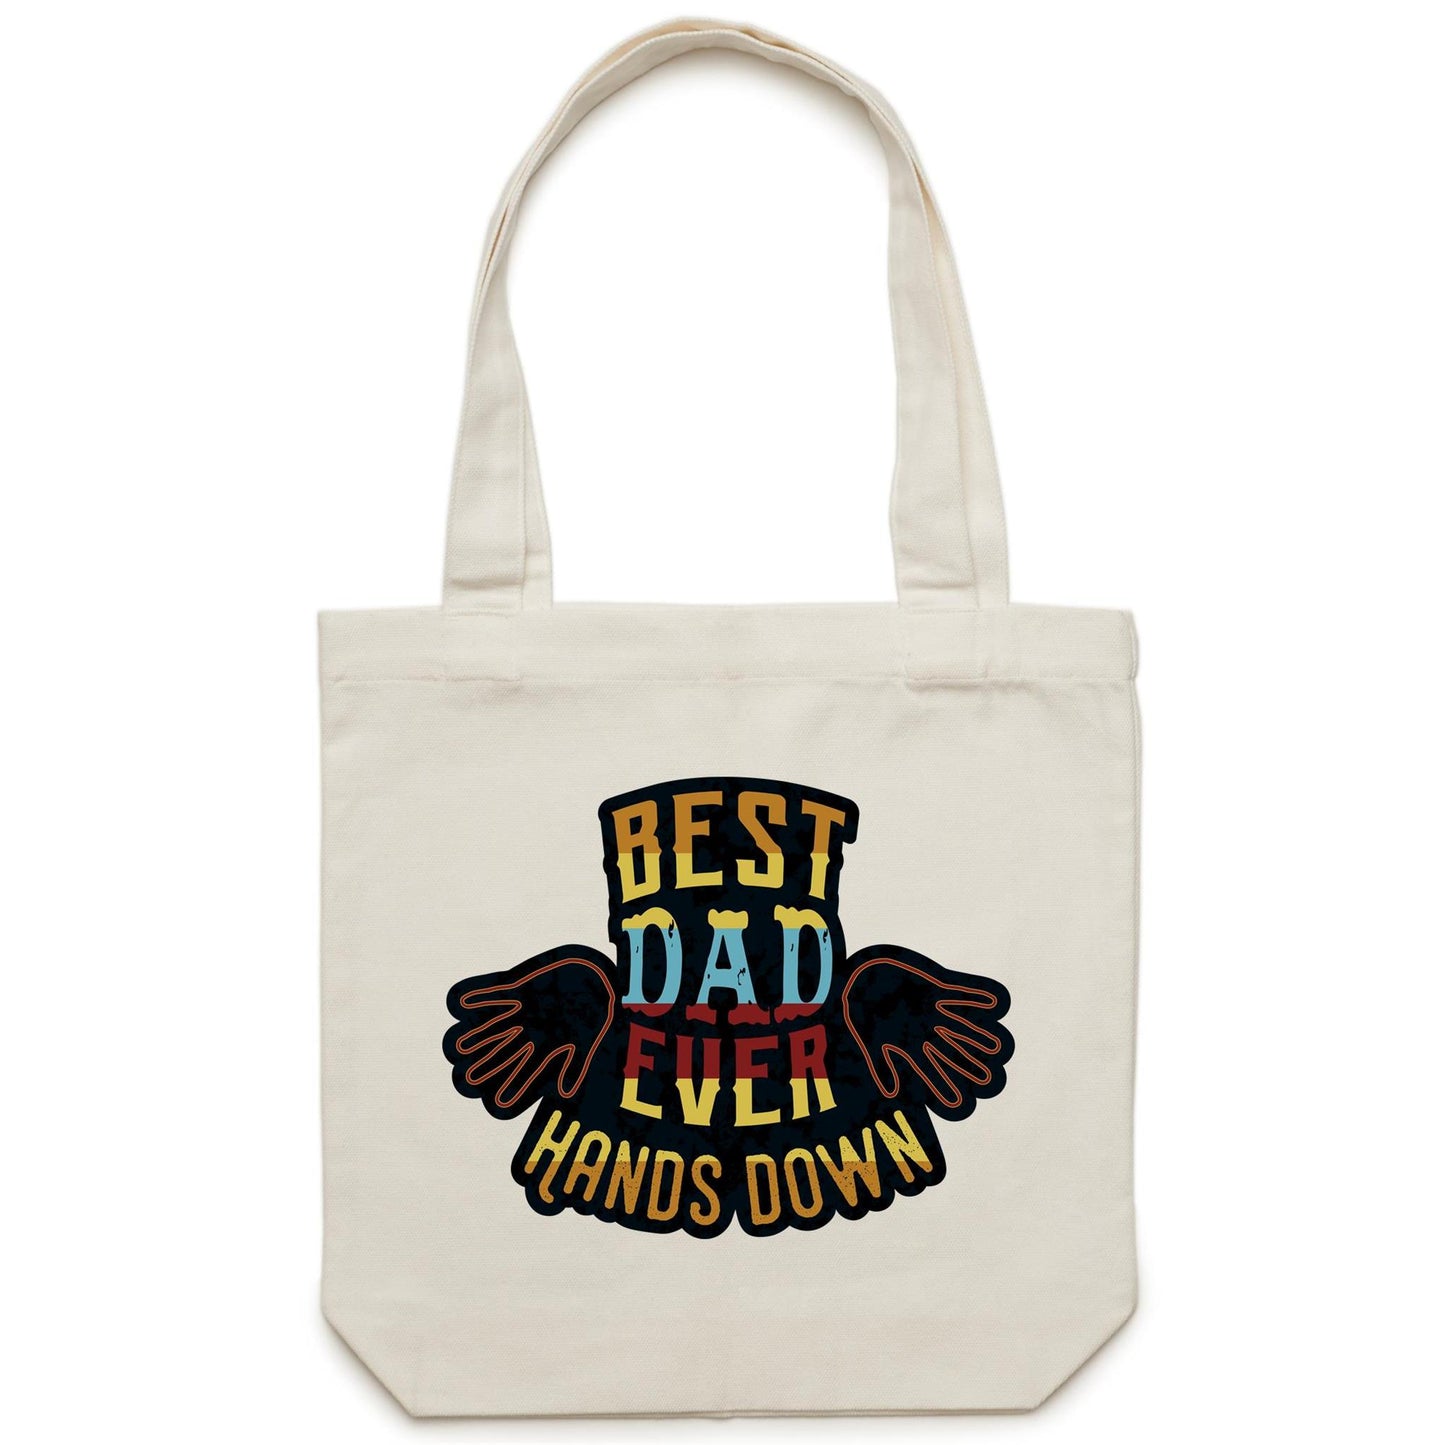 Best Dad Ever, Hands Down - Canvas Tote Bag Cream One Size Tote Bag Dad